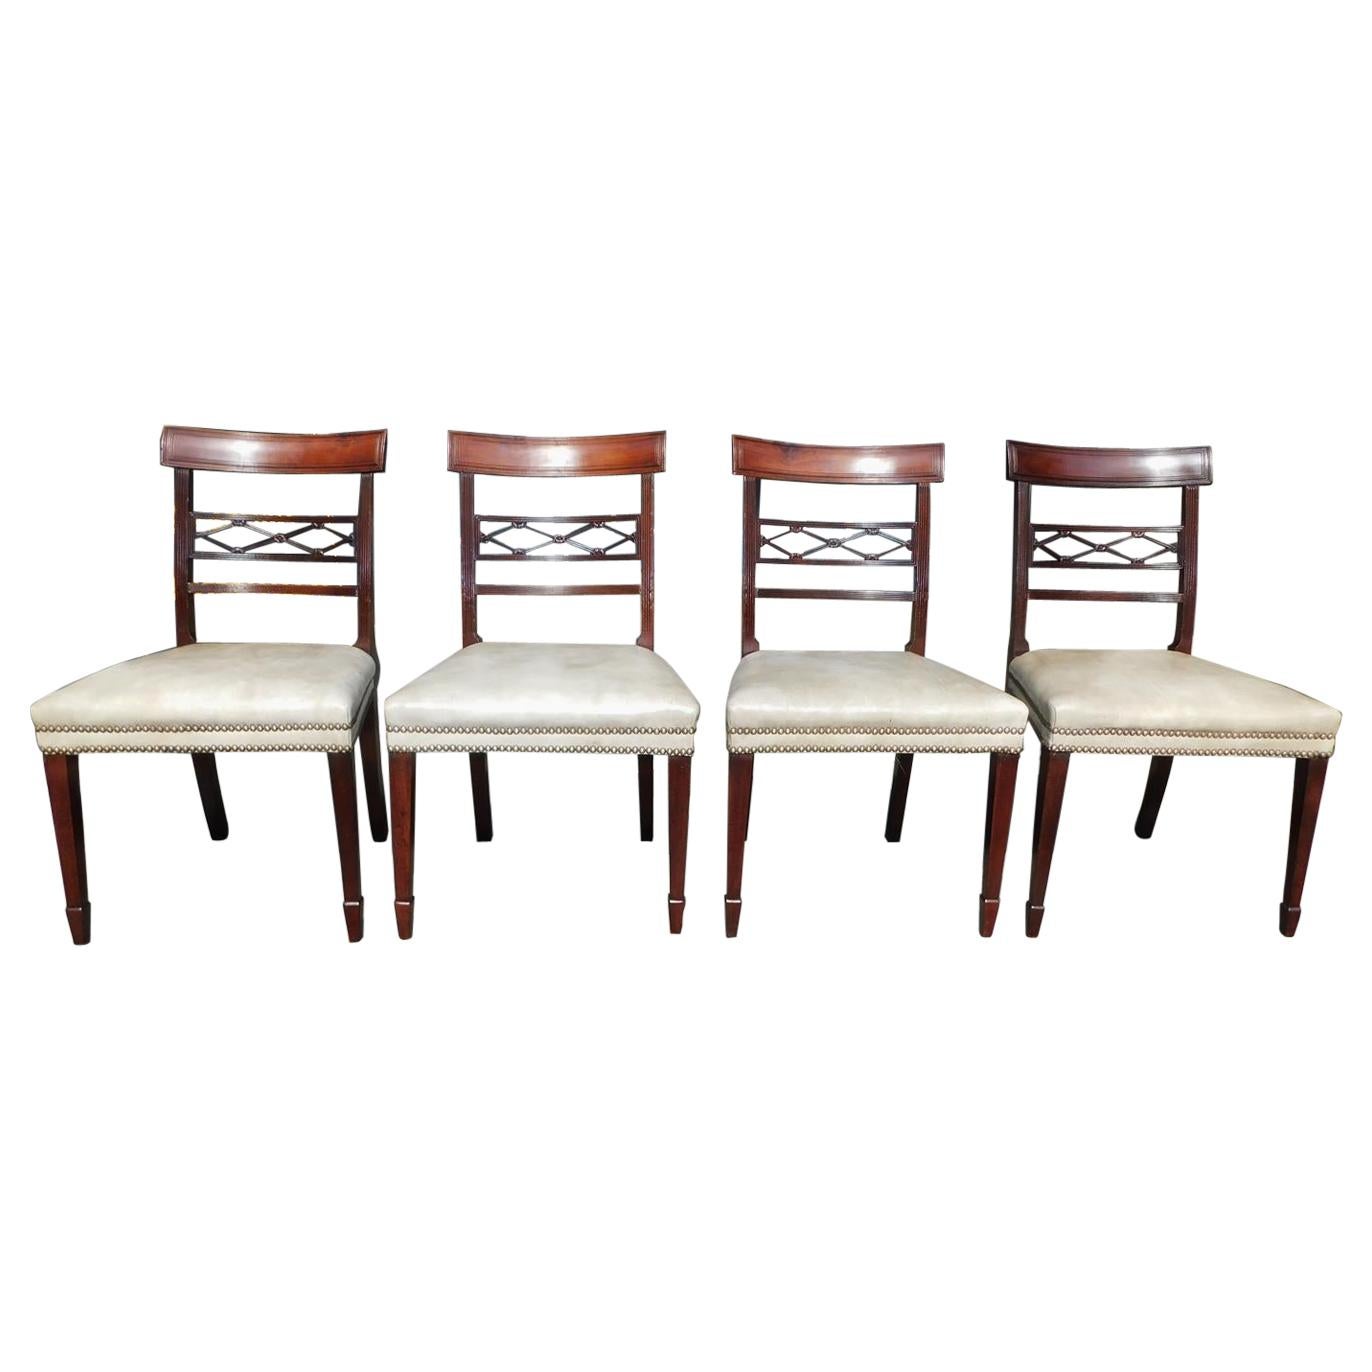 Set of Four English Regency Mahogany Dining Room Chairs, Circa 1810 For Sale